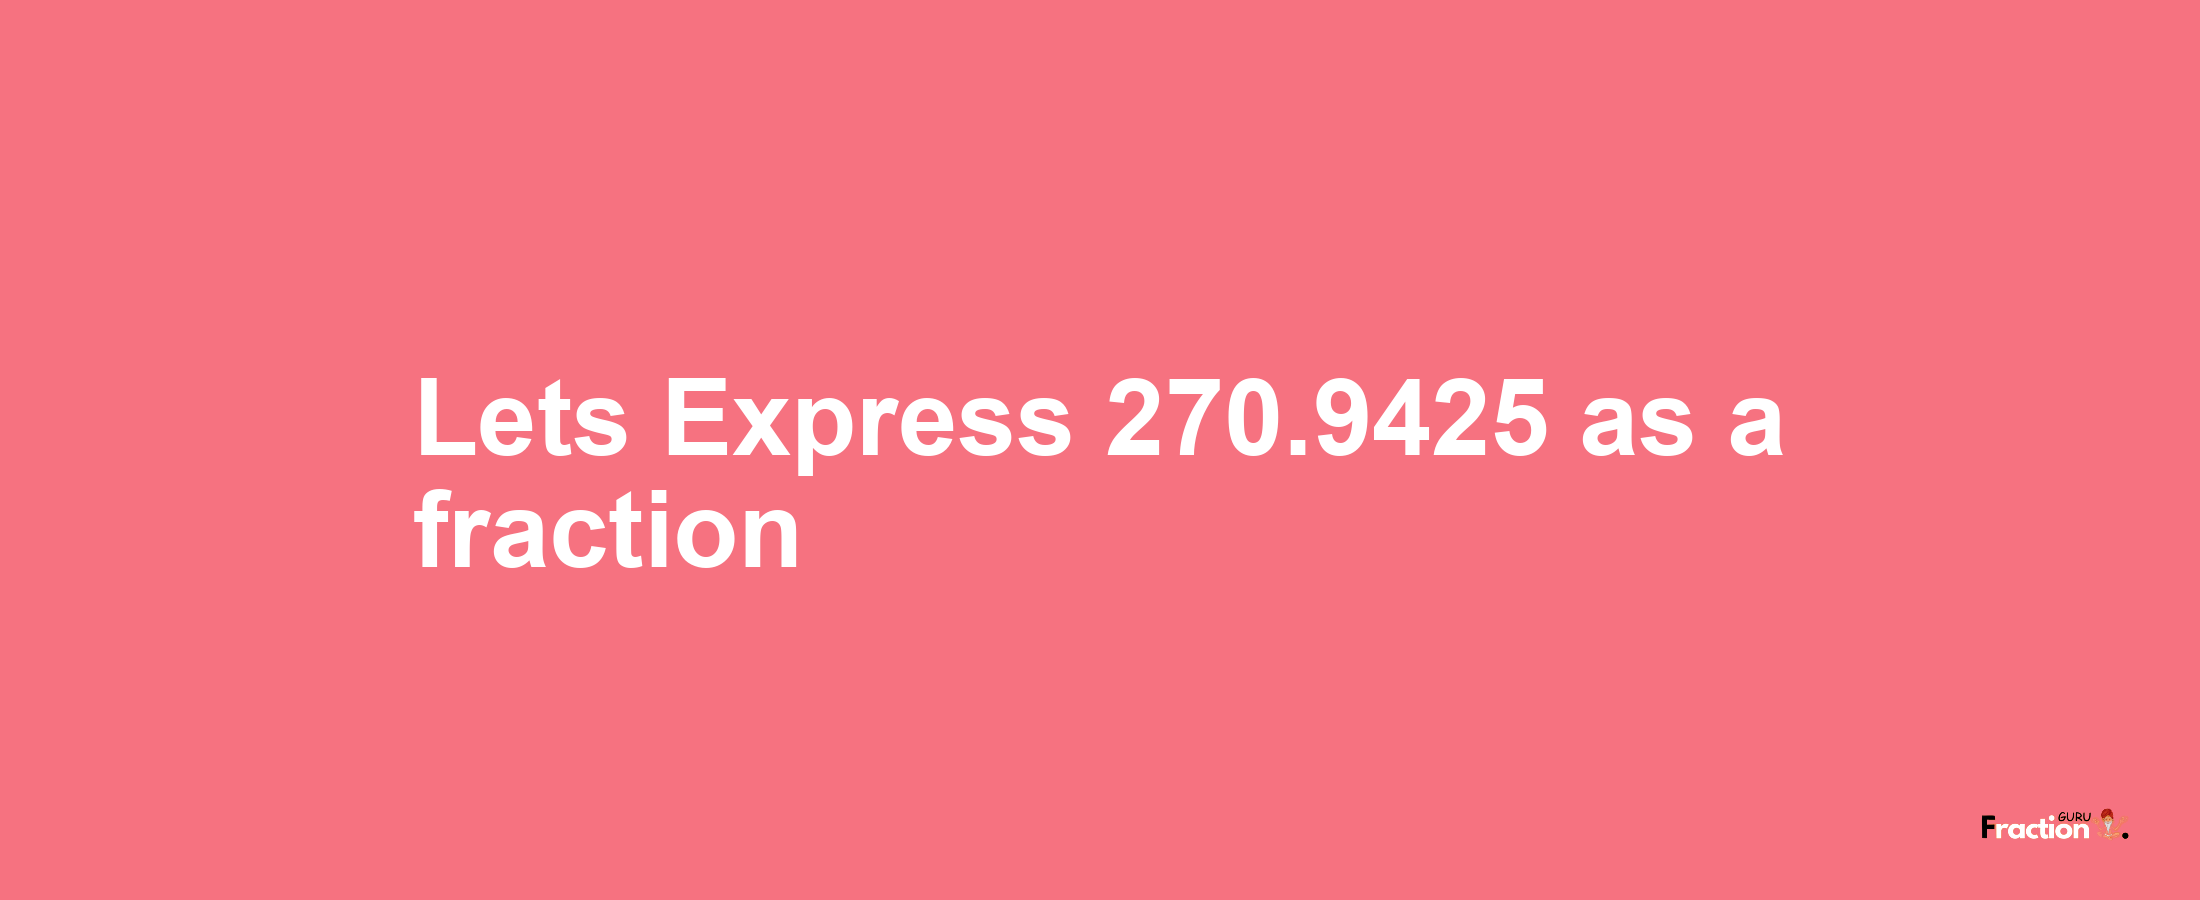 Lets Express 270.9425 as afraction